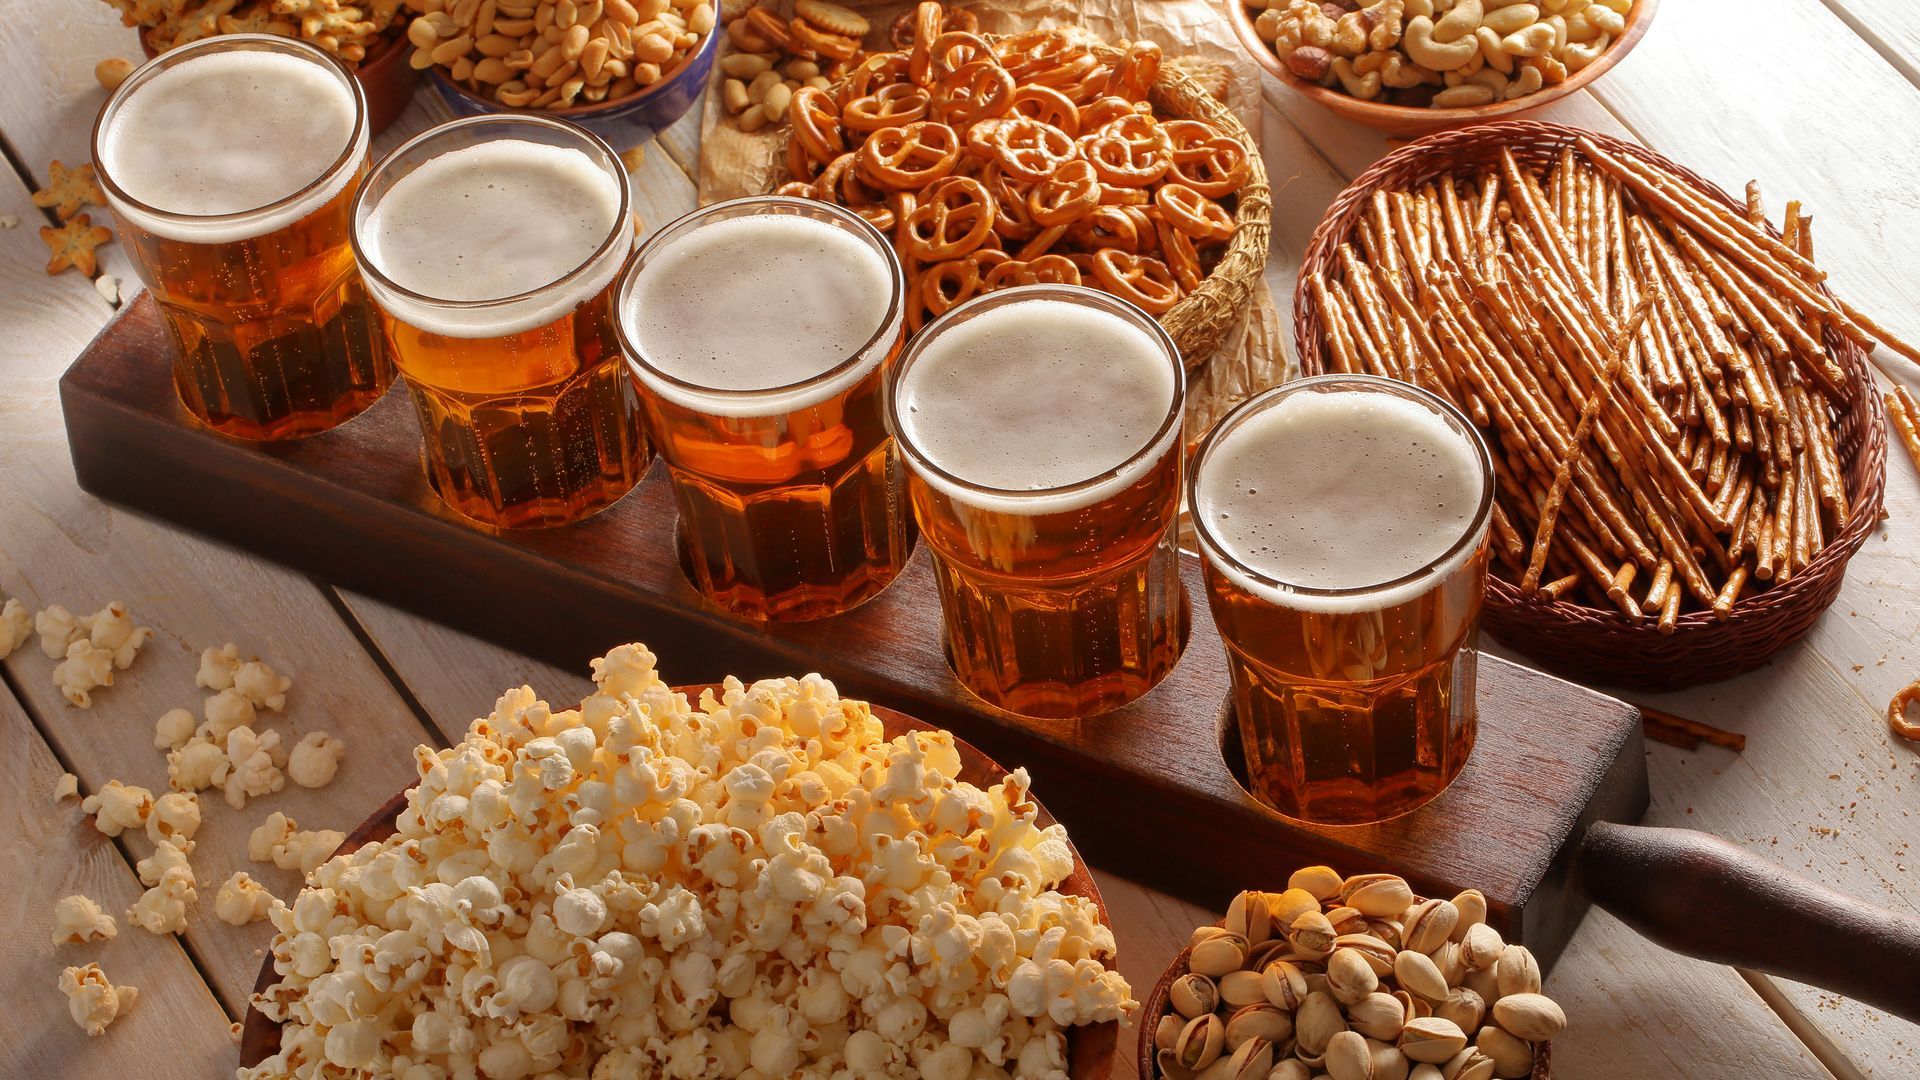 Popcorn Dried Fruits and Five Beer Glasses Wallpaper